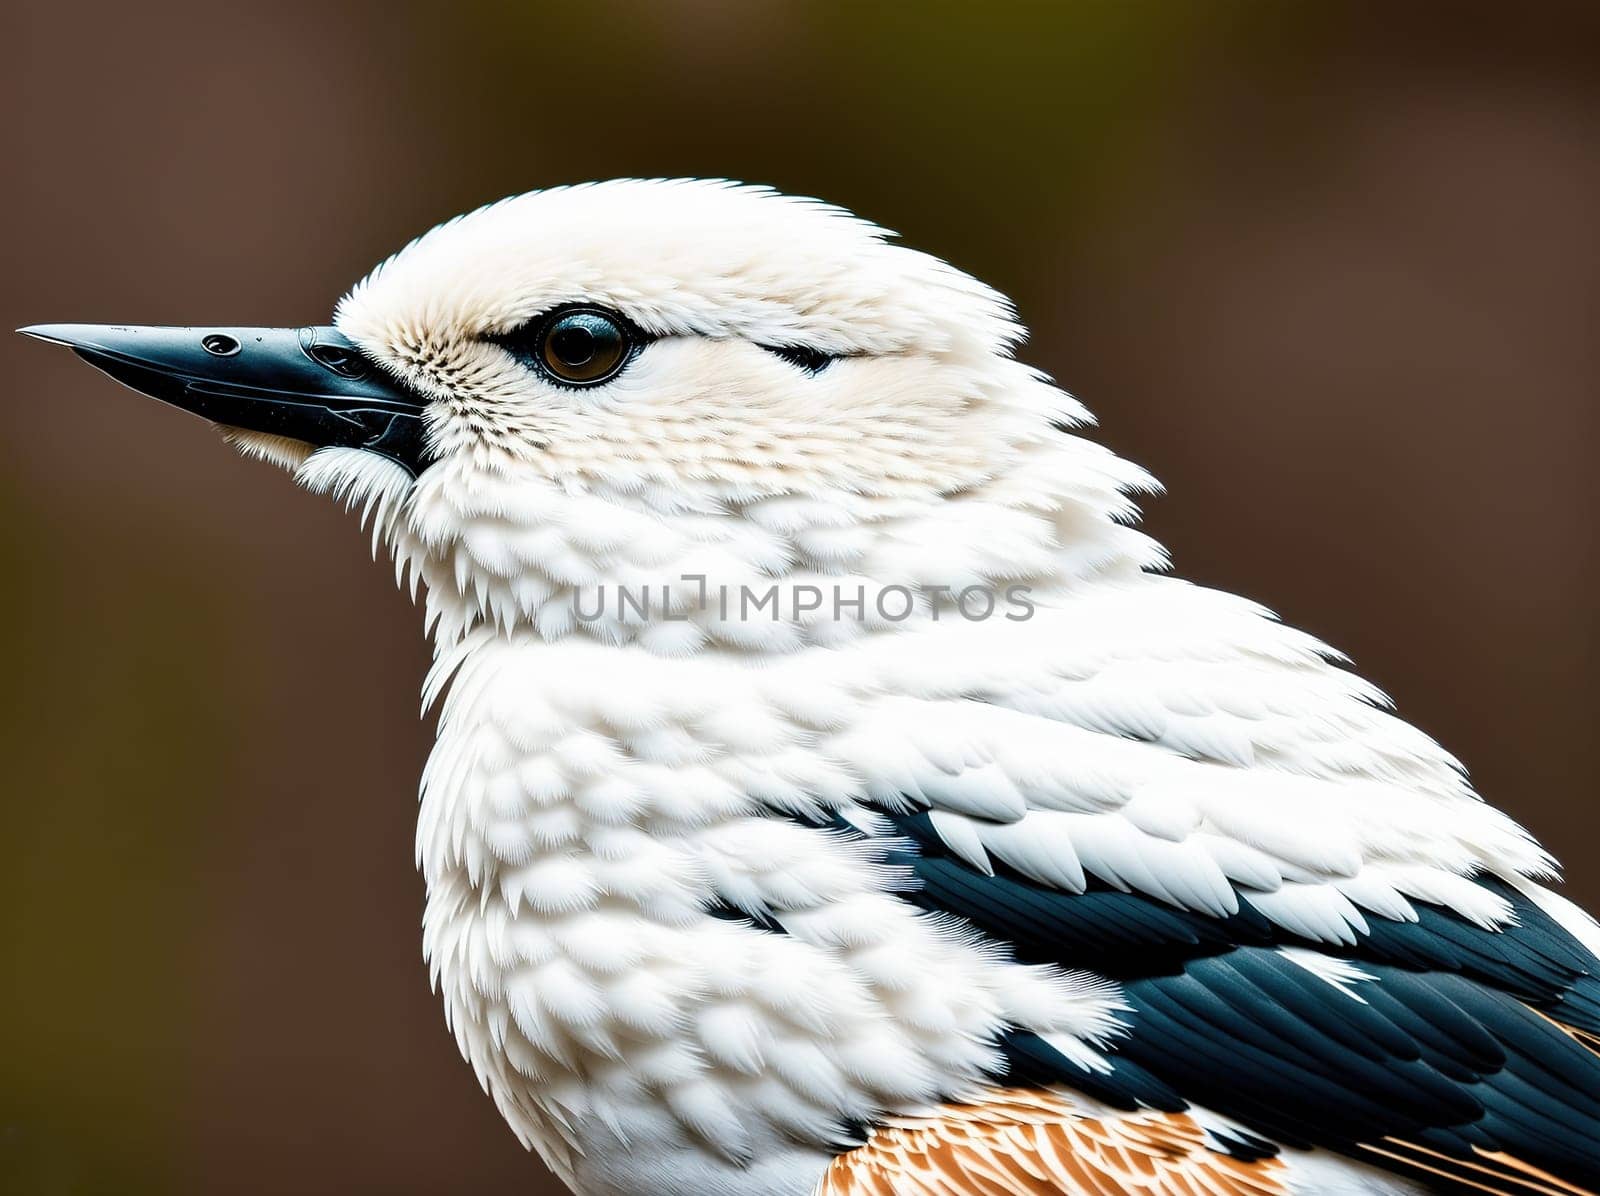 The image shows a small, white bird perched on a branch with its beak open and looking directly at the camera.